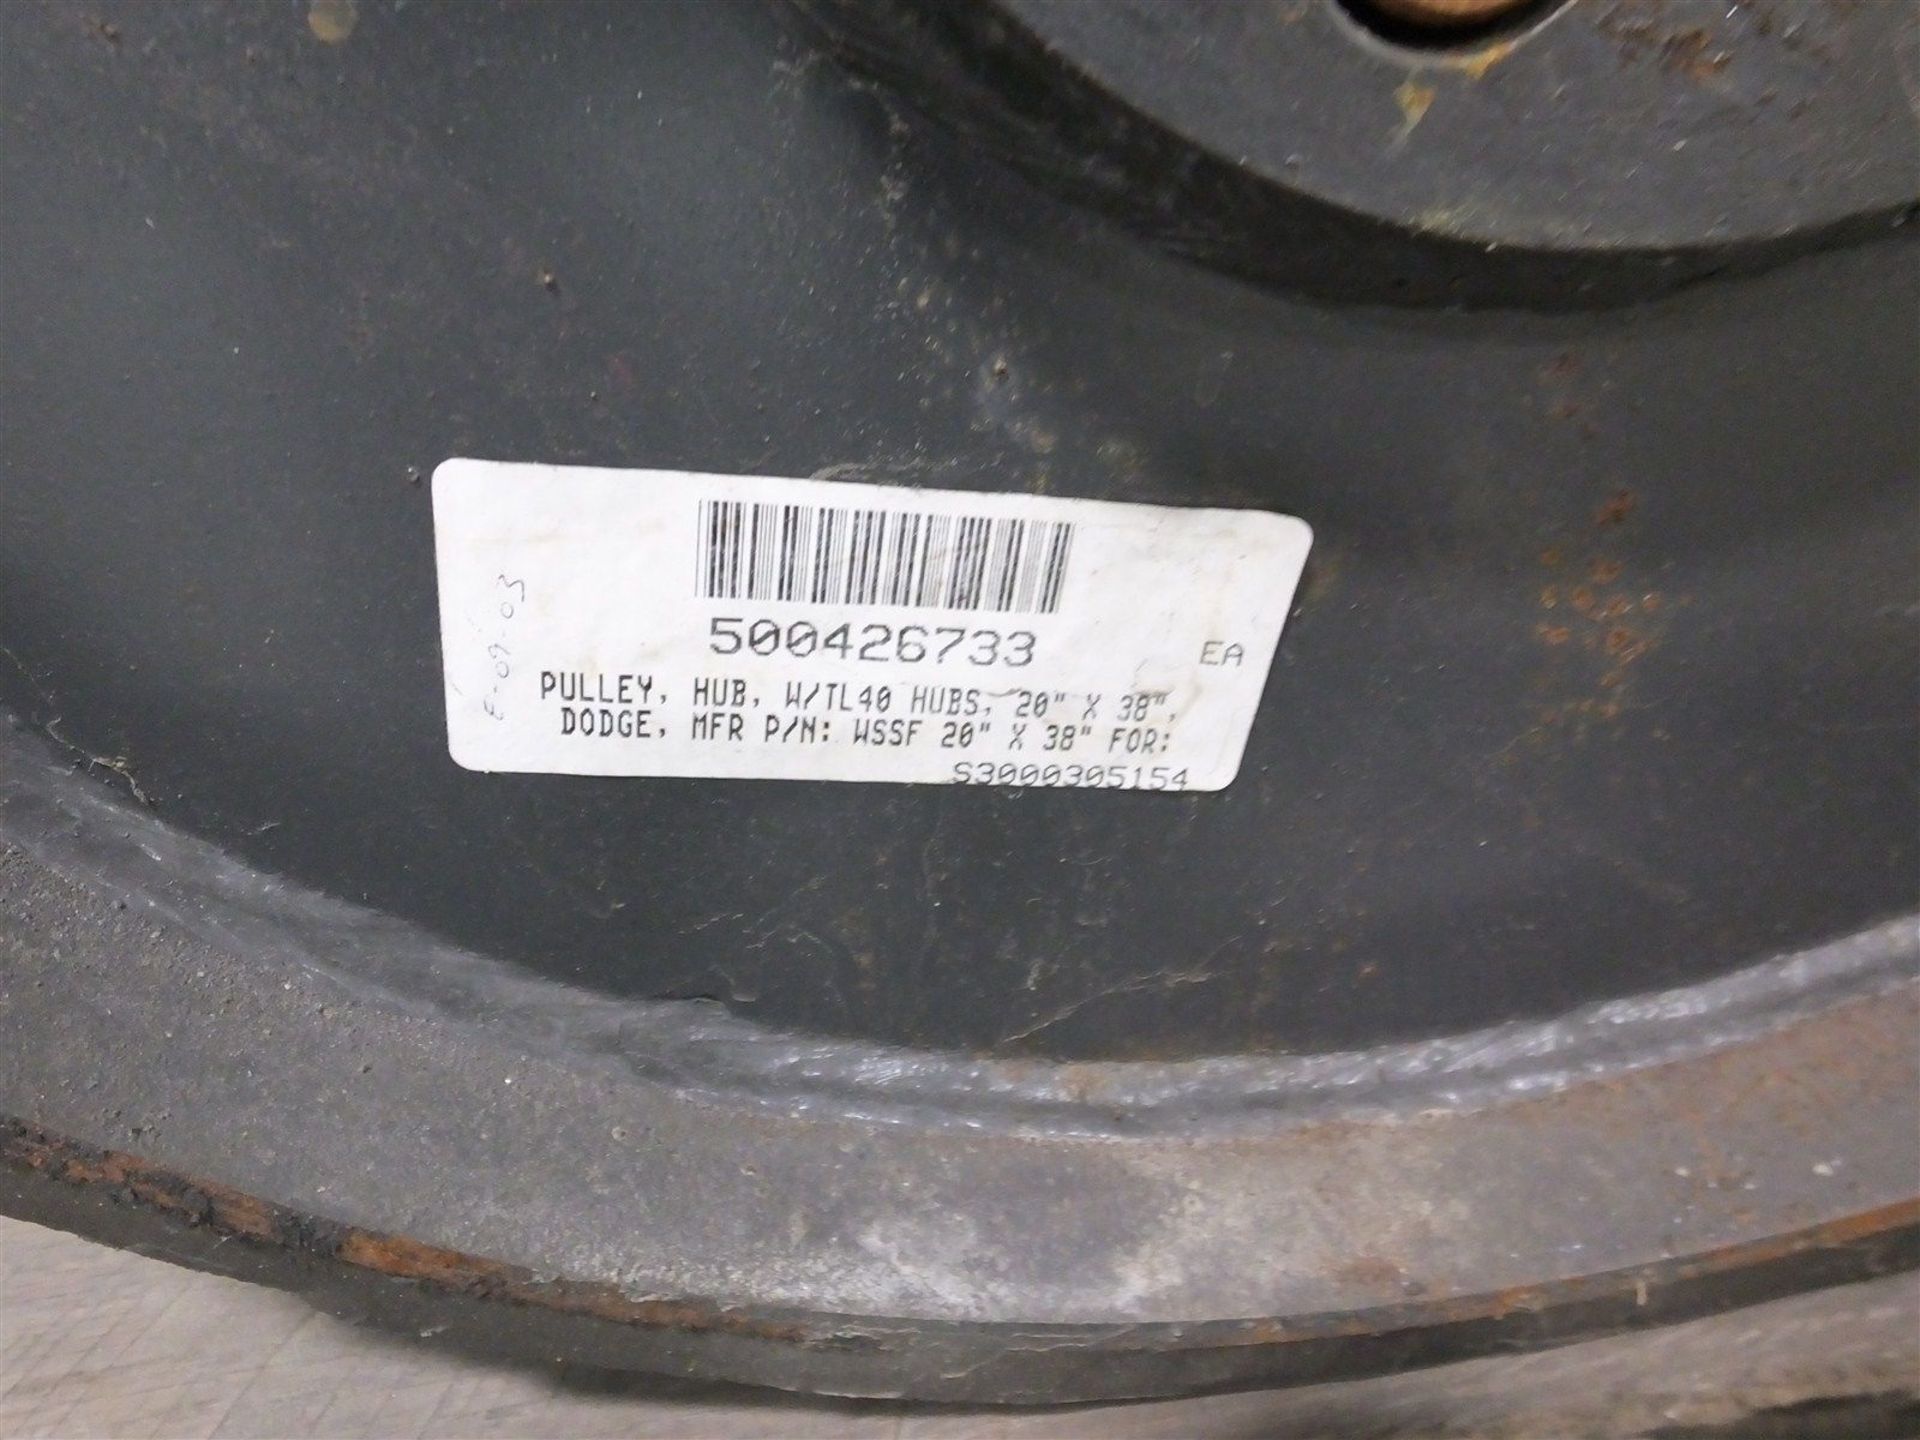 Dodge Pulley WSSF 20 in X 38 in Hub W/TL40 (Rigging Fee - $95) - Image 2 of 5